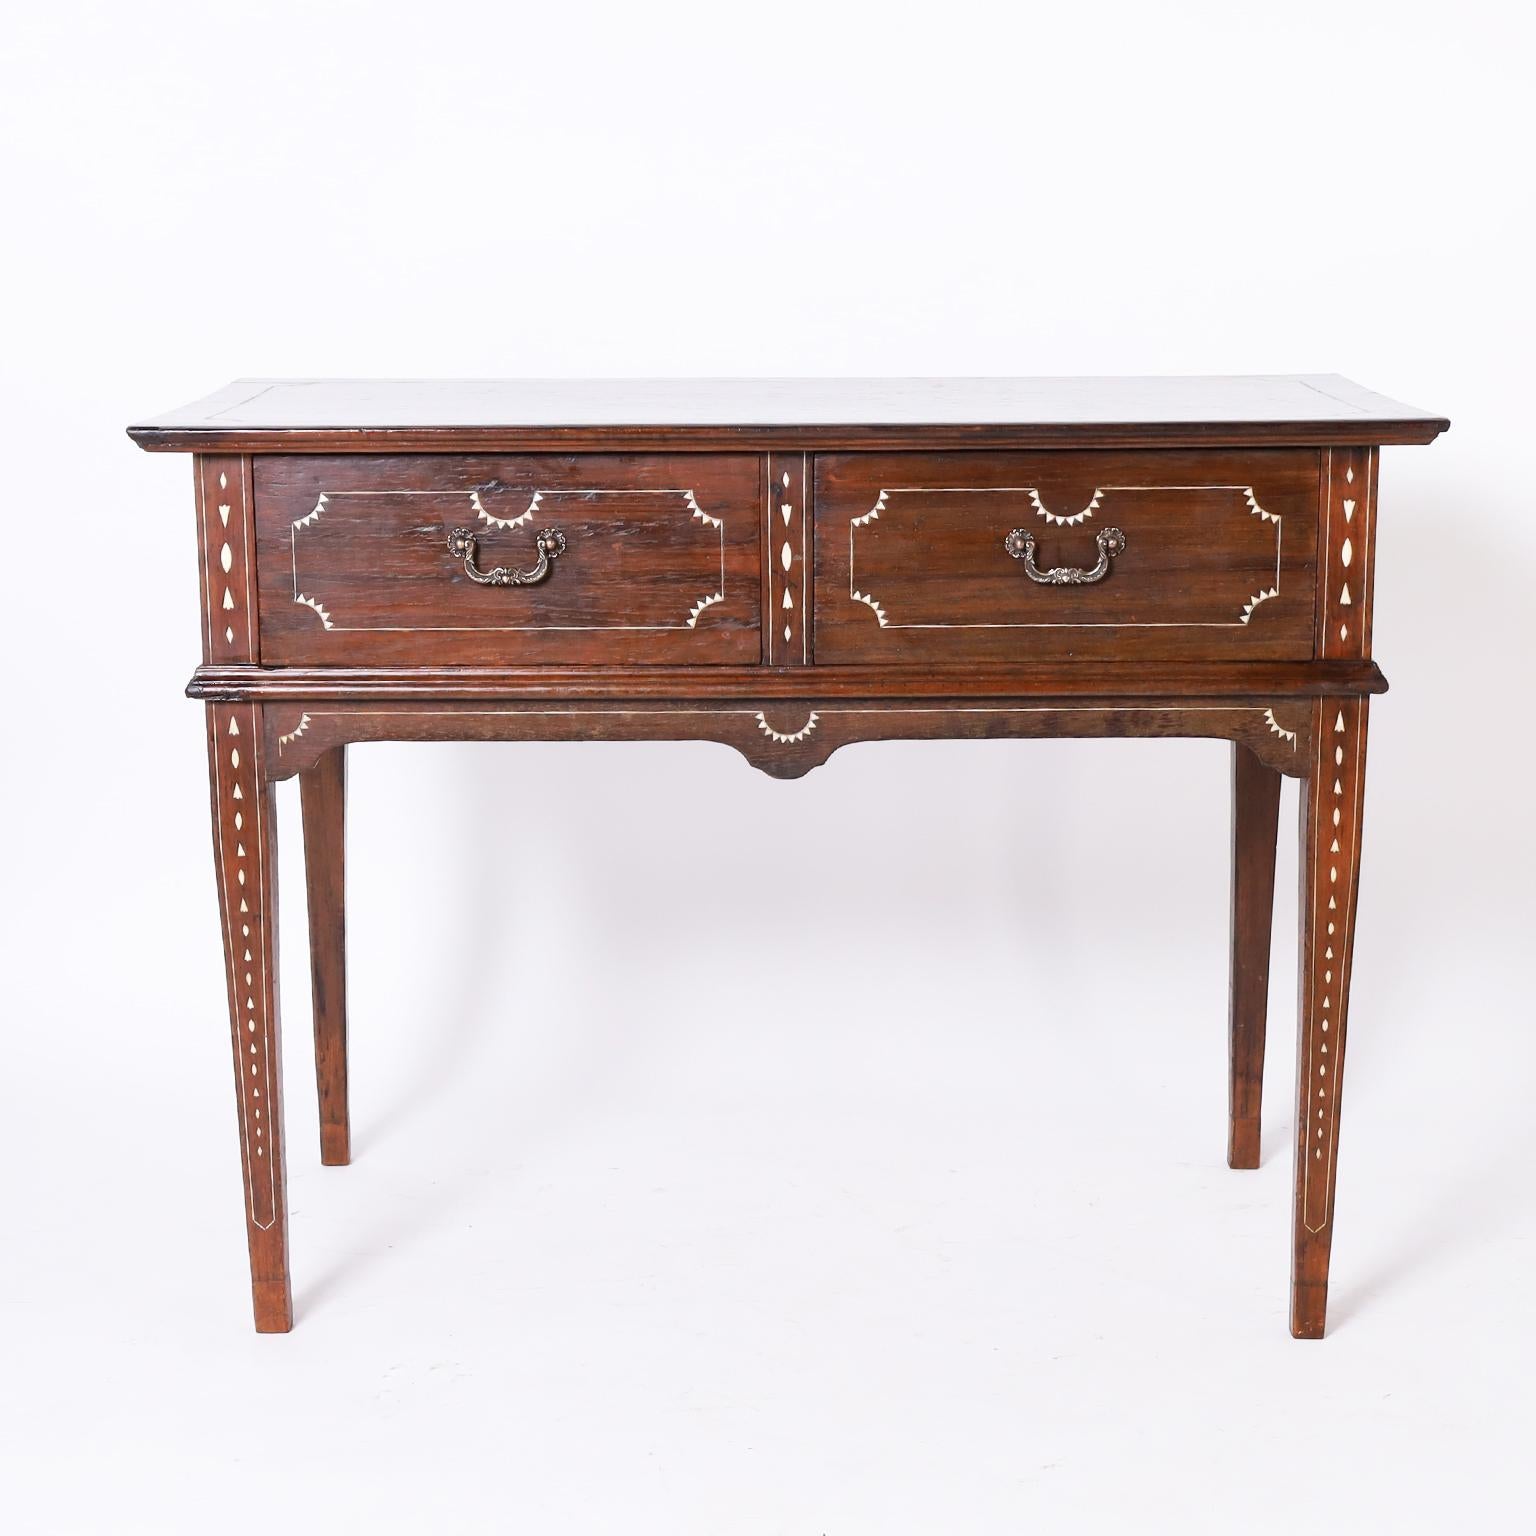 Sideboard from the Philippines, often confused with Anglo Indian,crafted in rosewood with classic practical form having two drawers with brass hardware, geometric bone inlays, and long tapered legs.  